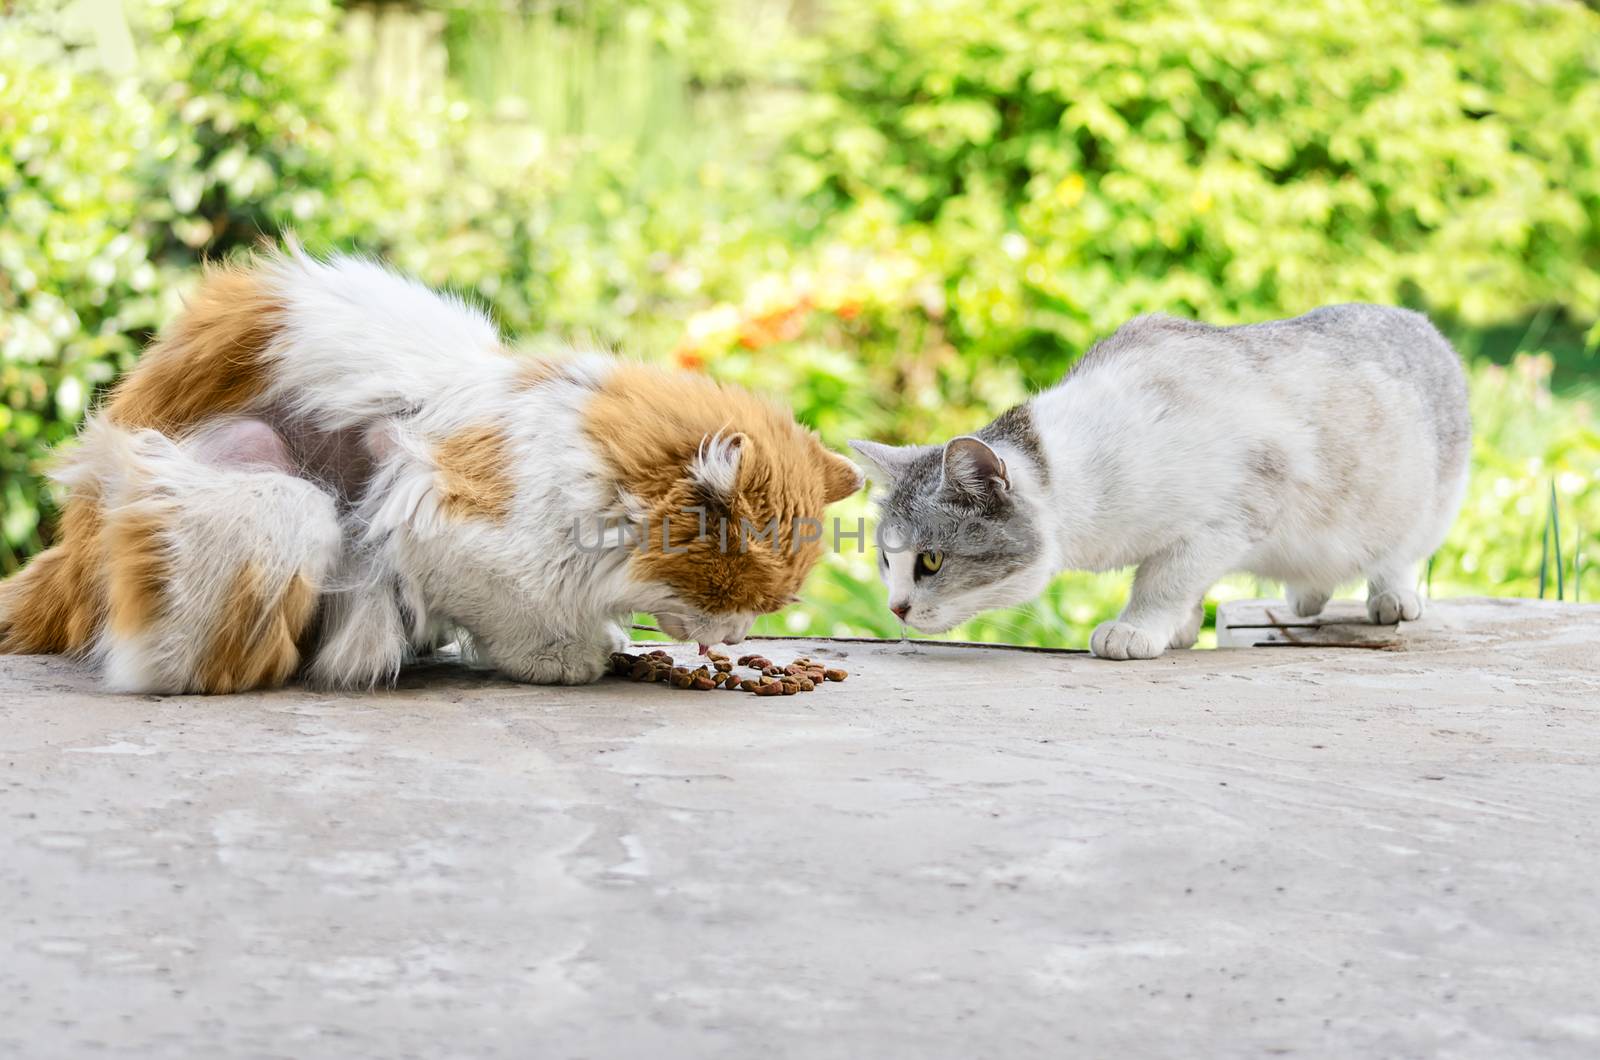 Cats eat cat food by Gaina